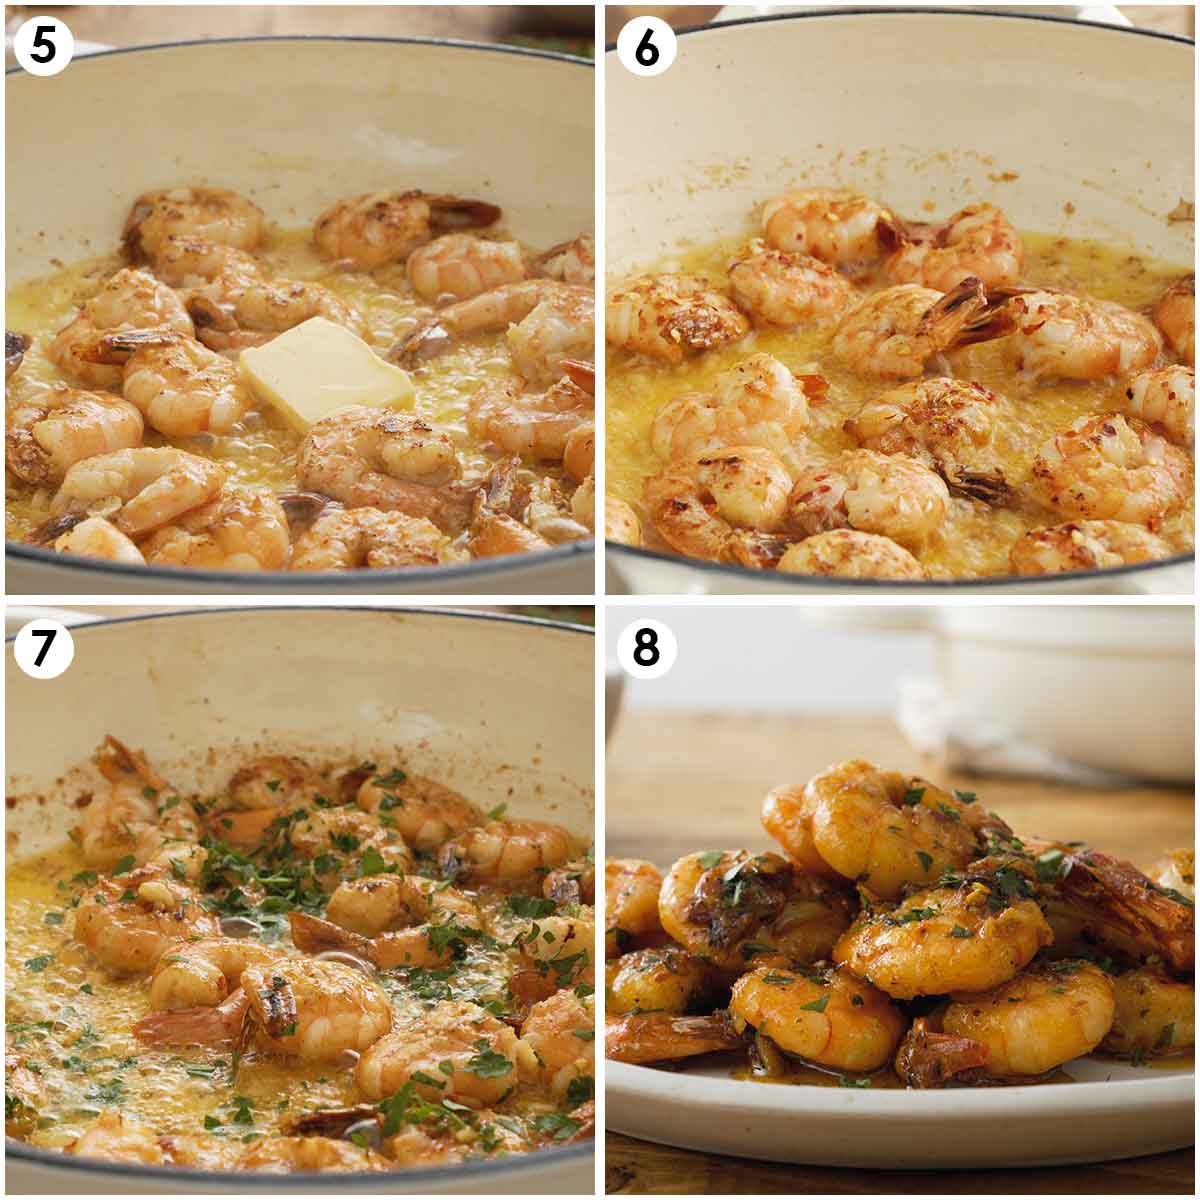 4 image collage showing how to sautee prawns with butter, chilli, and parsley. 